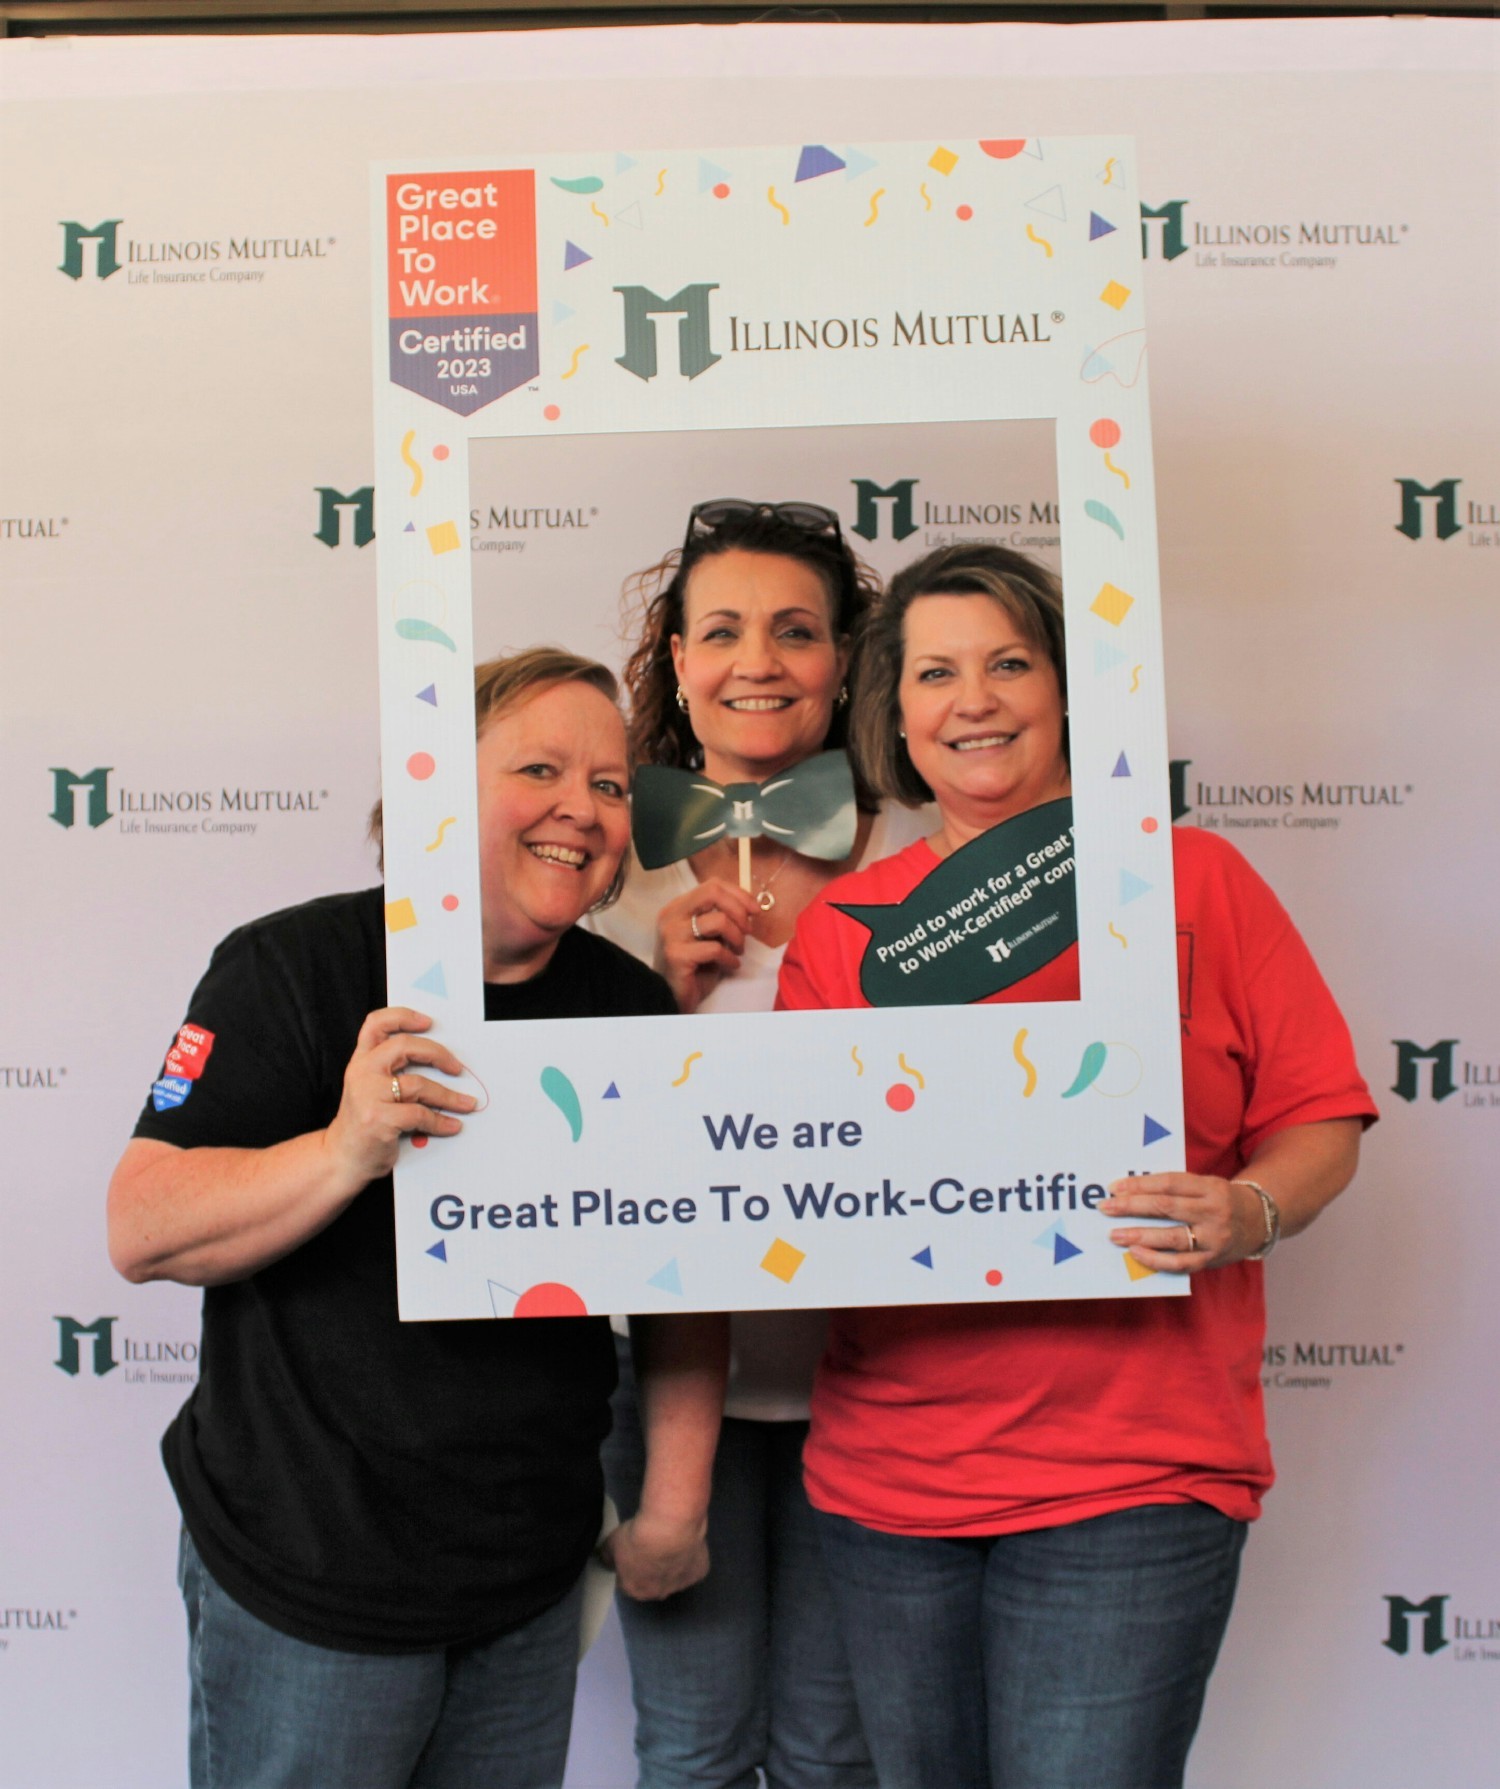 Employees had a great time taking selfies during our Great Place to Work certification celebration.